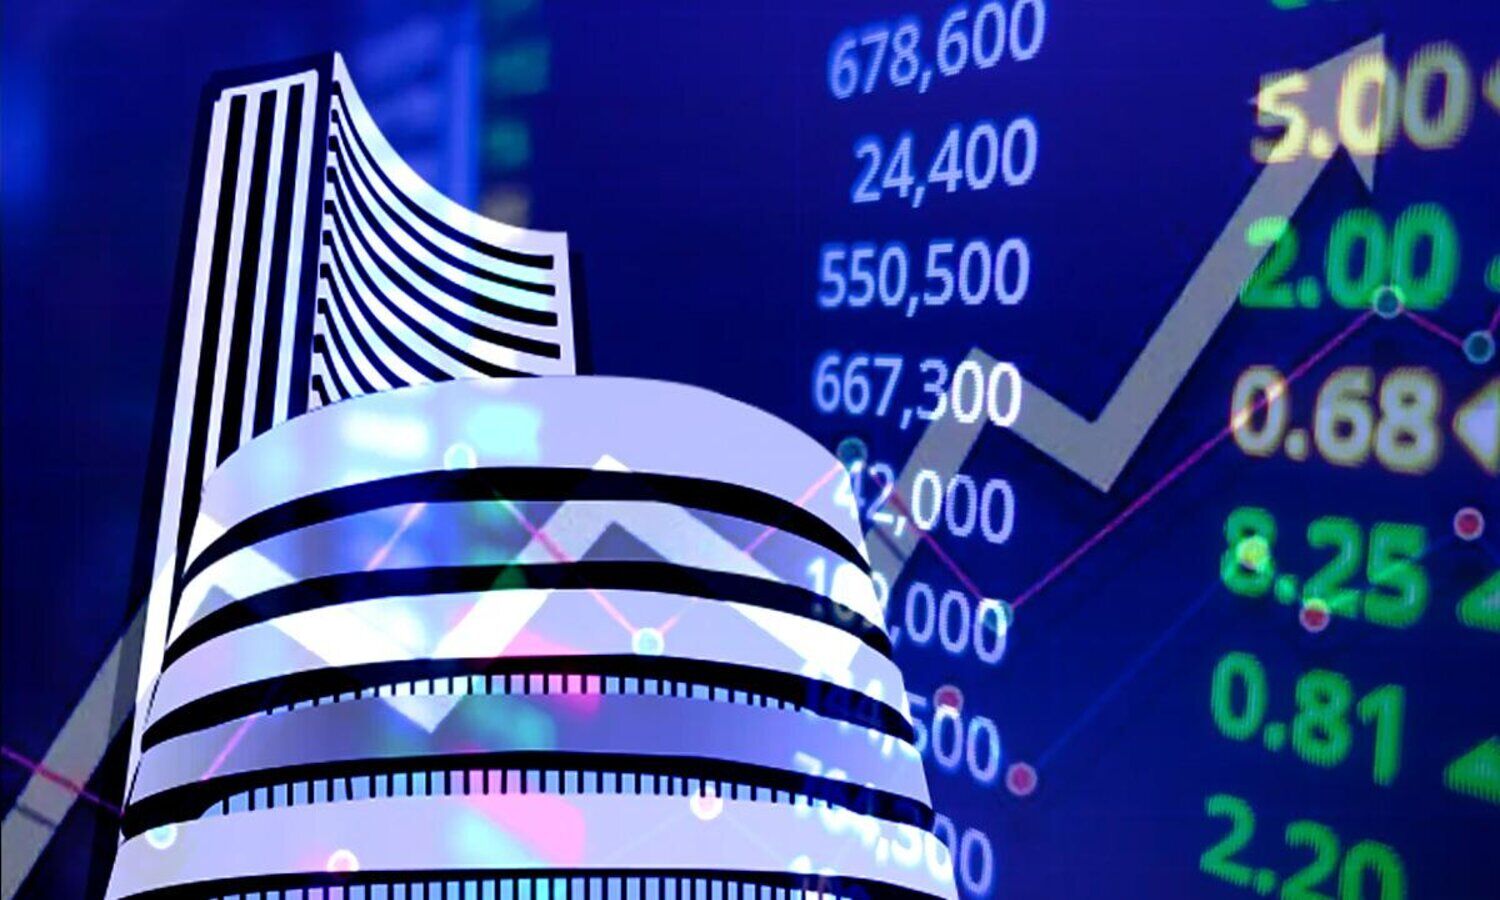 Share Market Today: Sensex and Nifty showed ups and downs after ups and downs